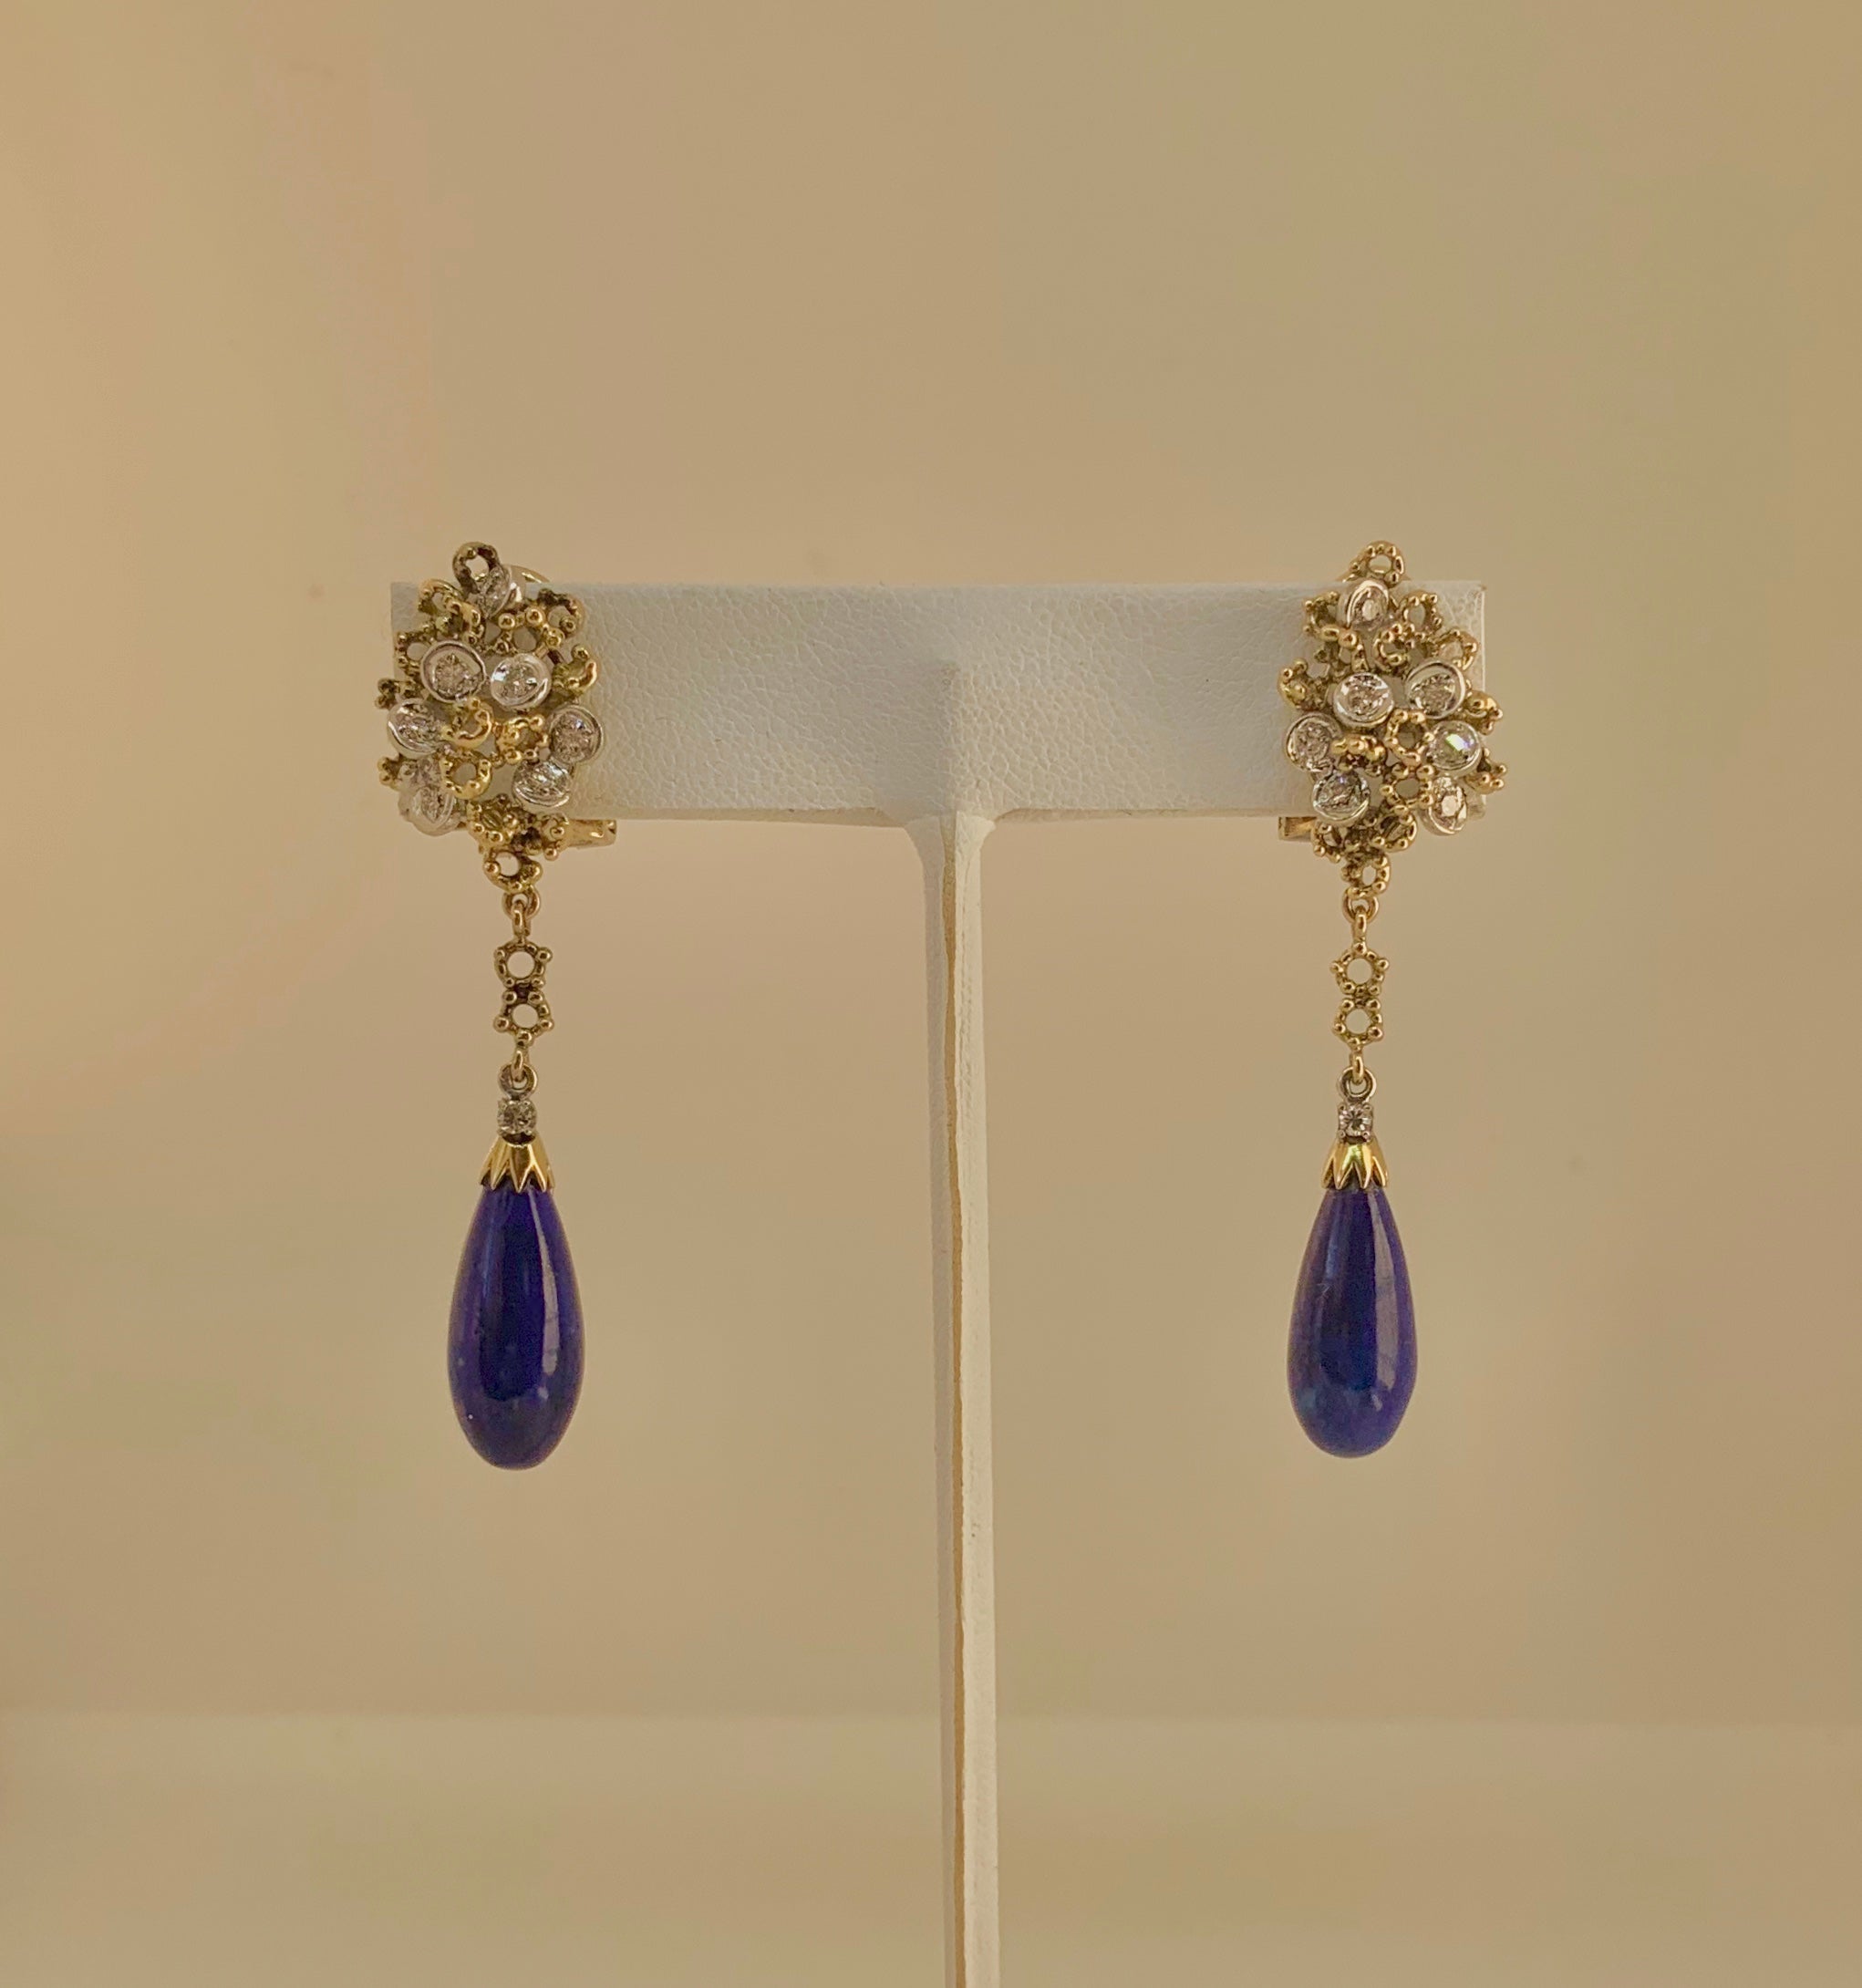 These are a stunning pair of Lapis Lazuli Diamond Mid-Century Modern dangle drop earrings in 18 Karat White and Yellow Gold.  The earrings feature gorgeous lapis lazuli pendant drops.  The drops hang from a wonderful Mid-Century Modern design with